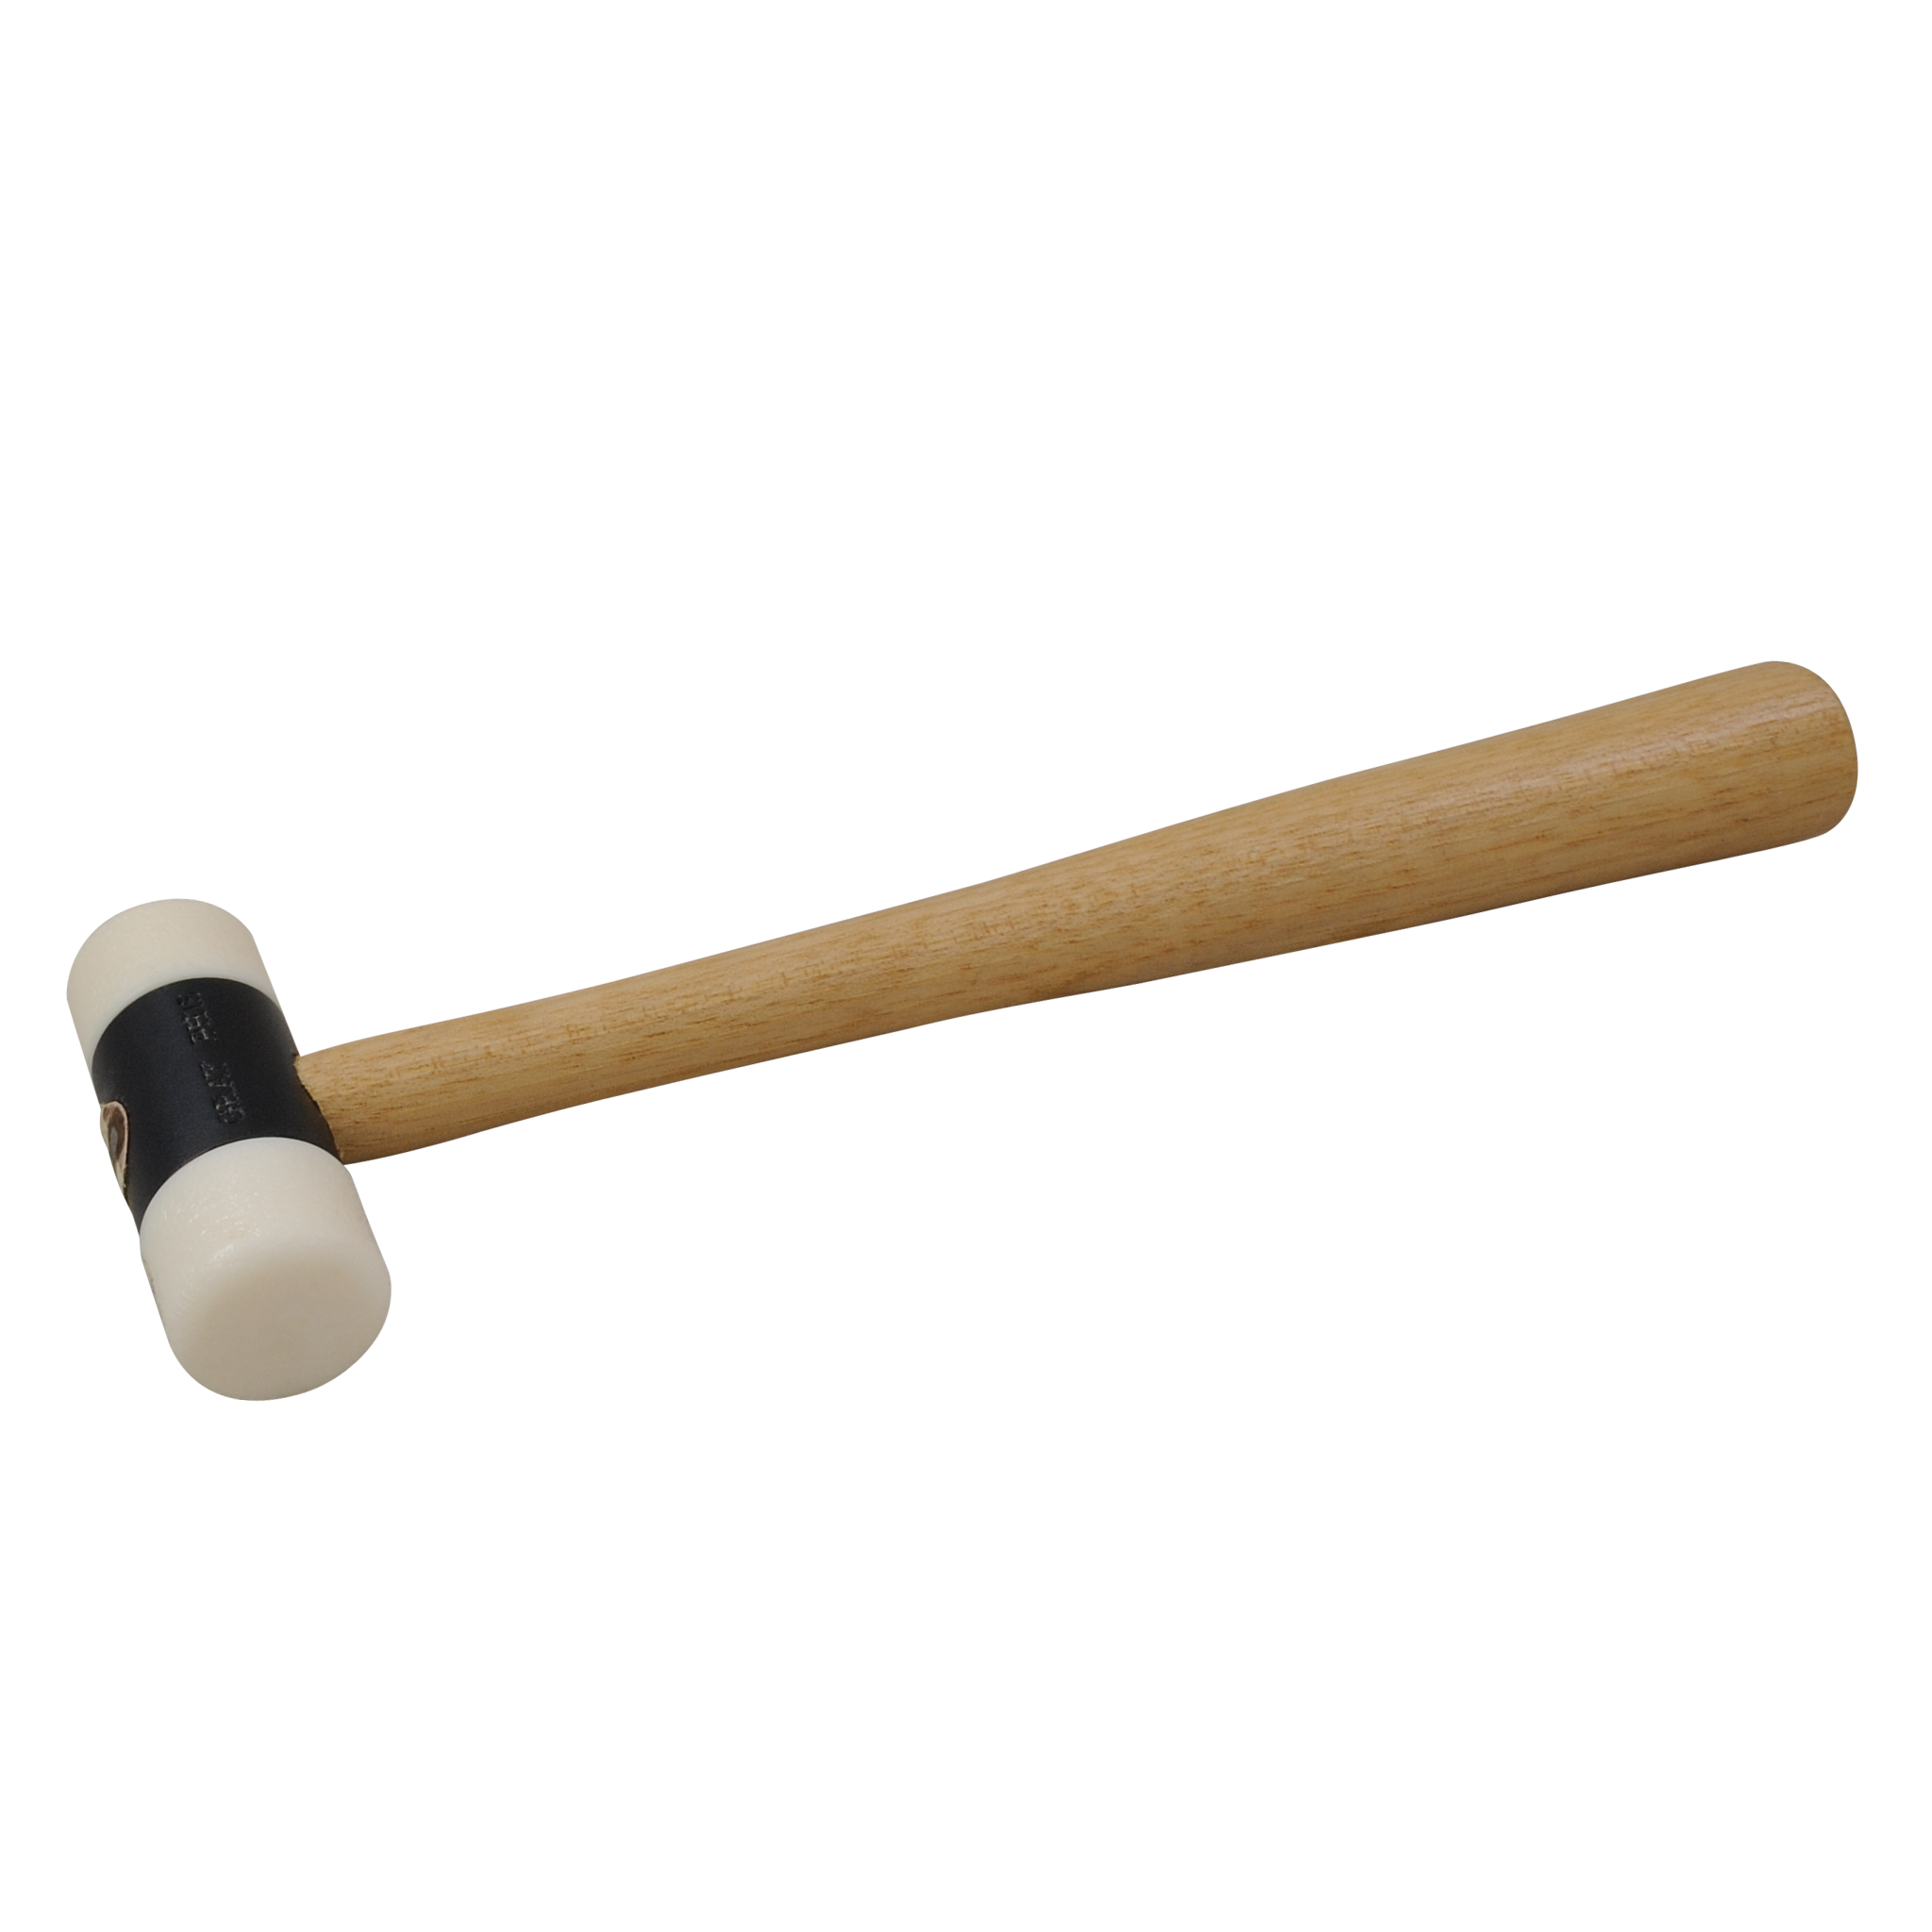 Soft Face Hammers, Plastic Composition Face with Wood Handle